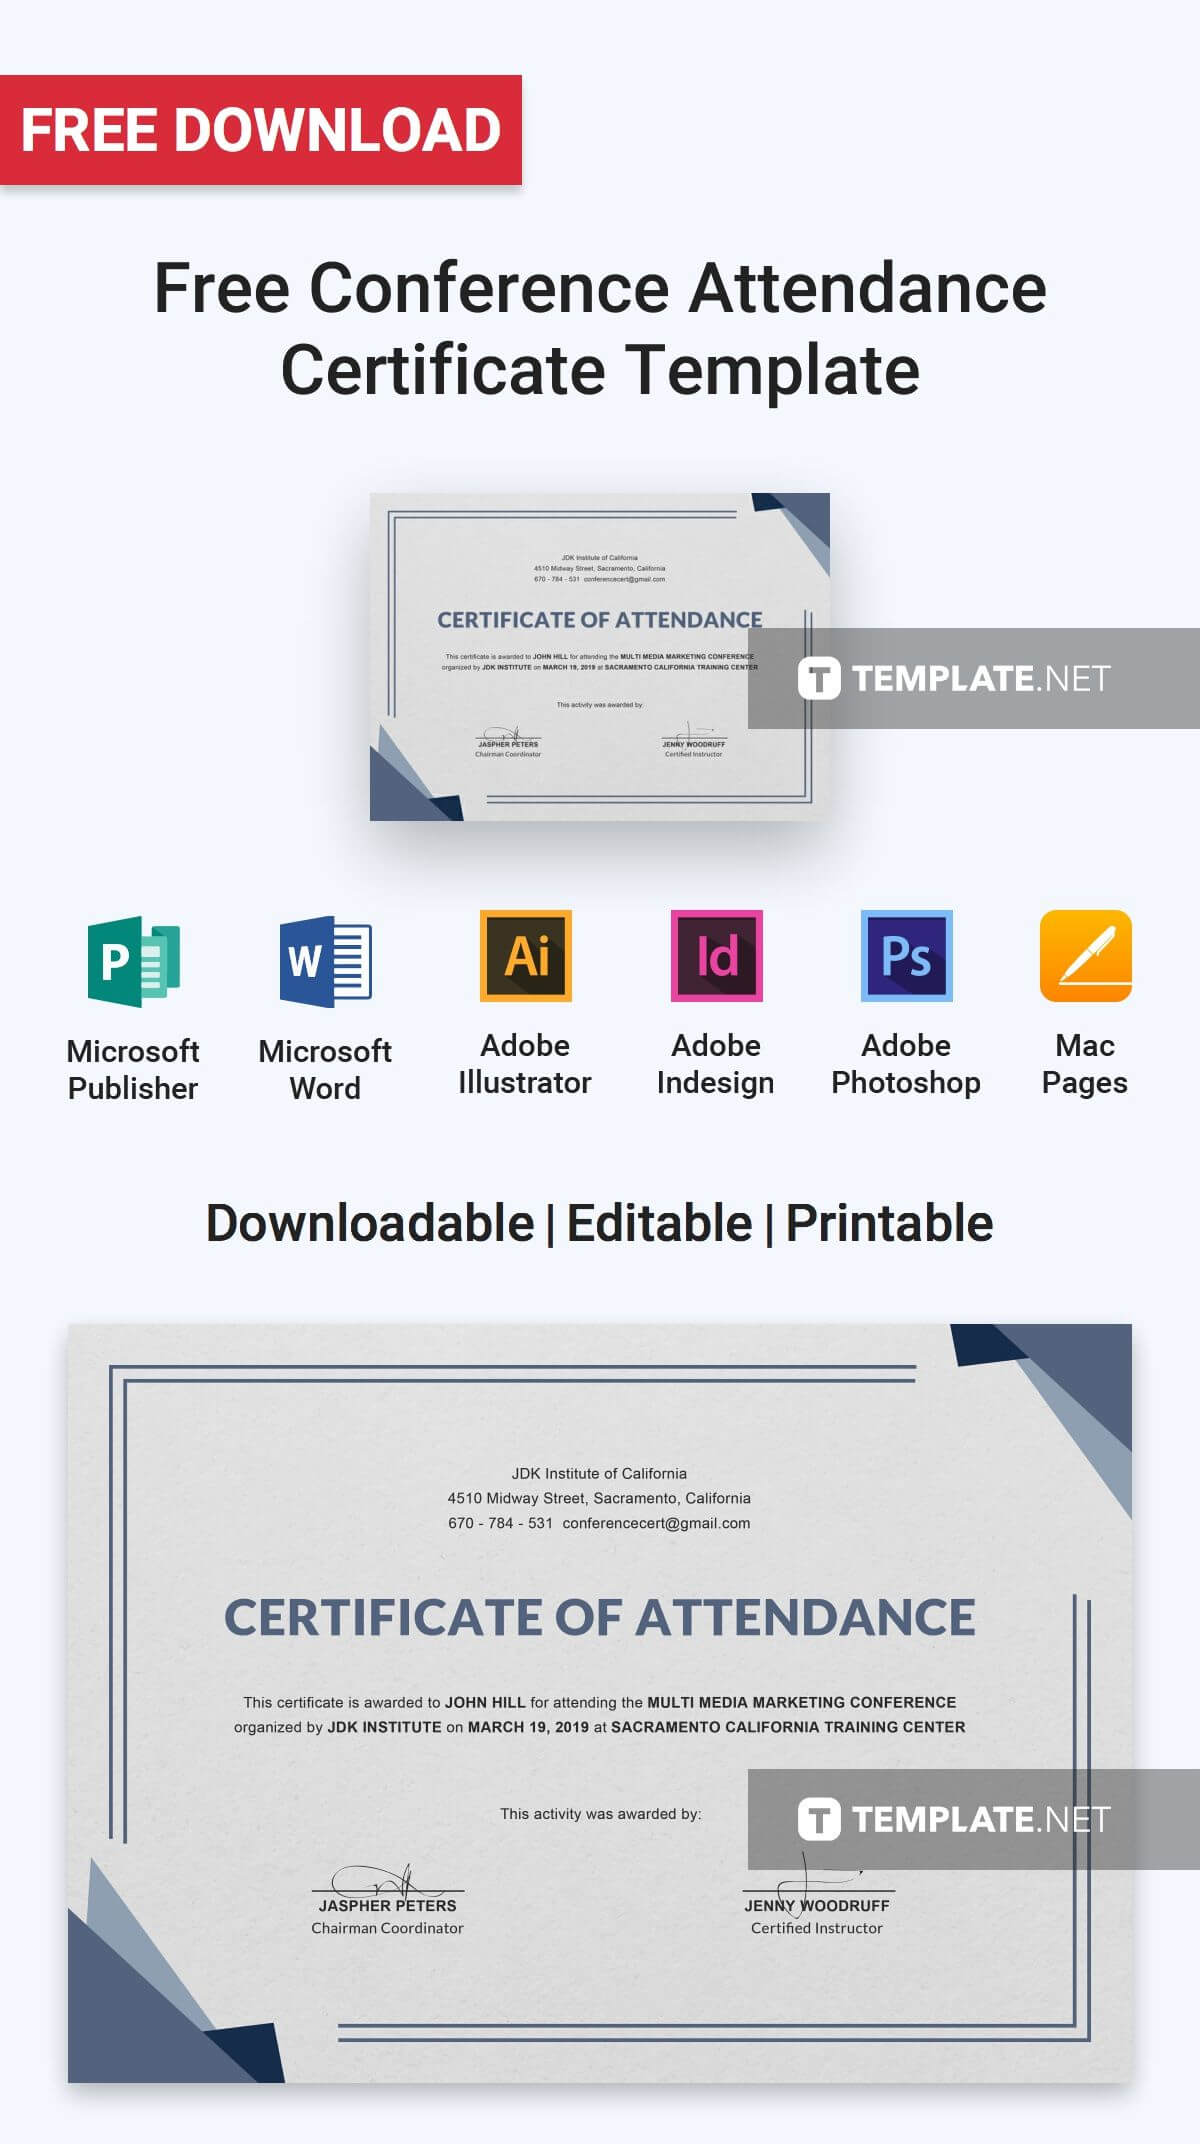 Free Conference Attendance Certificate | Attendance Intended For Certificate Of Attendance Conference Template